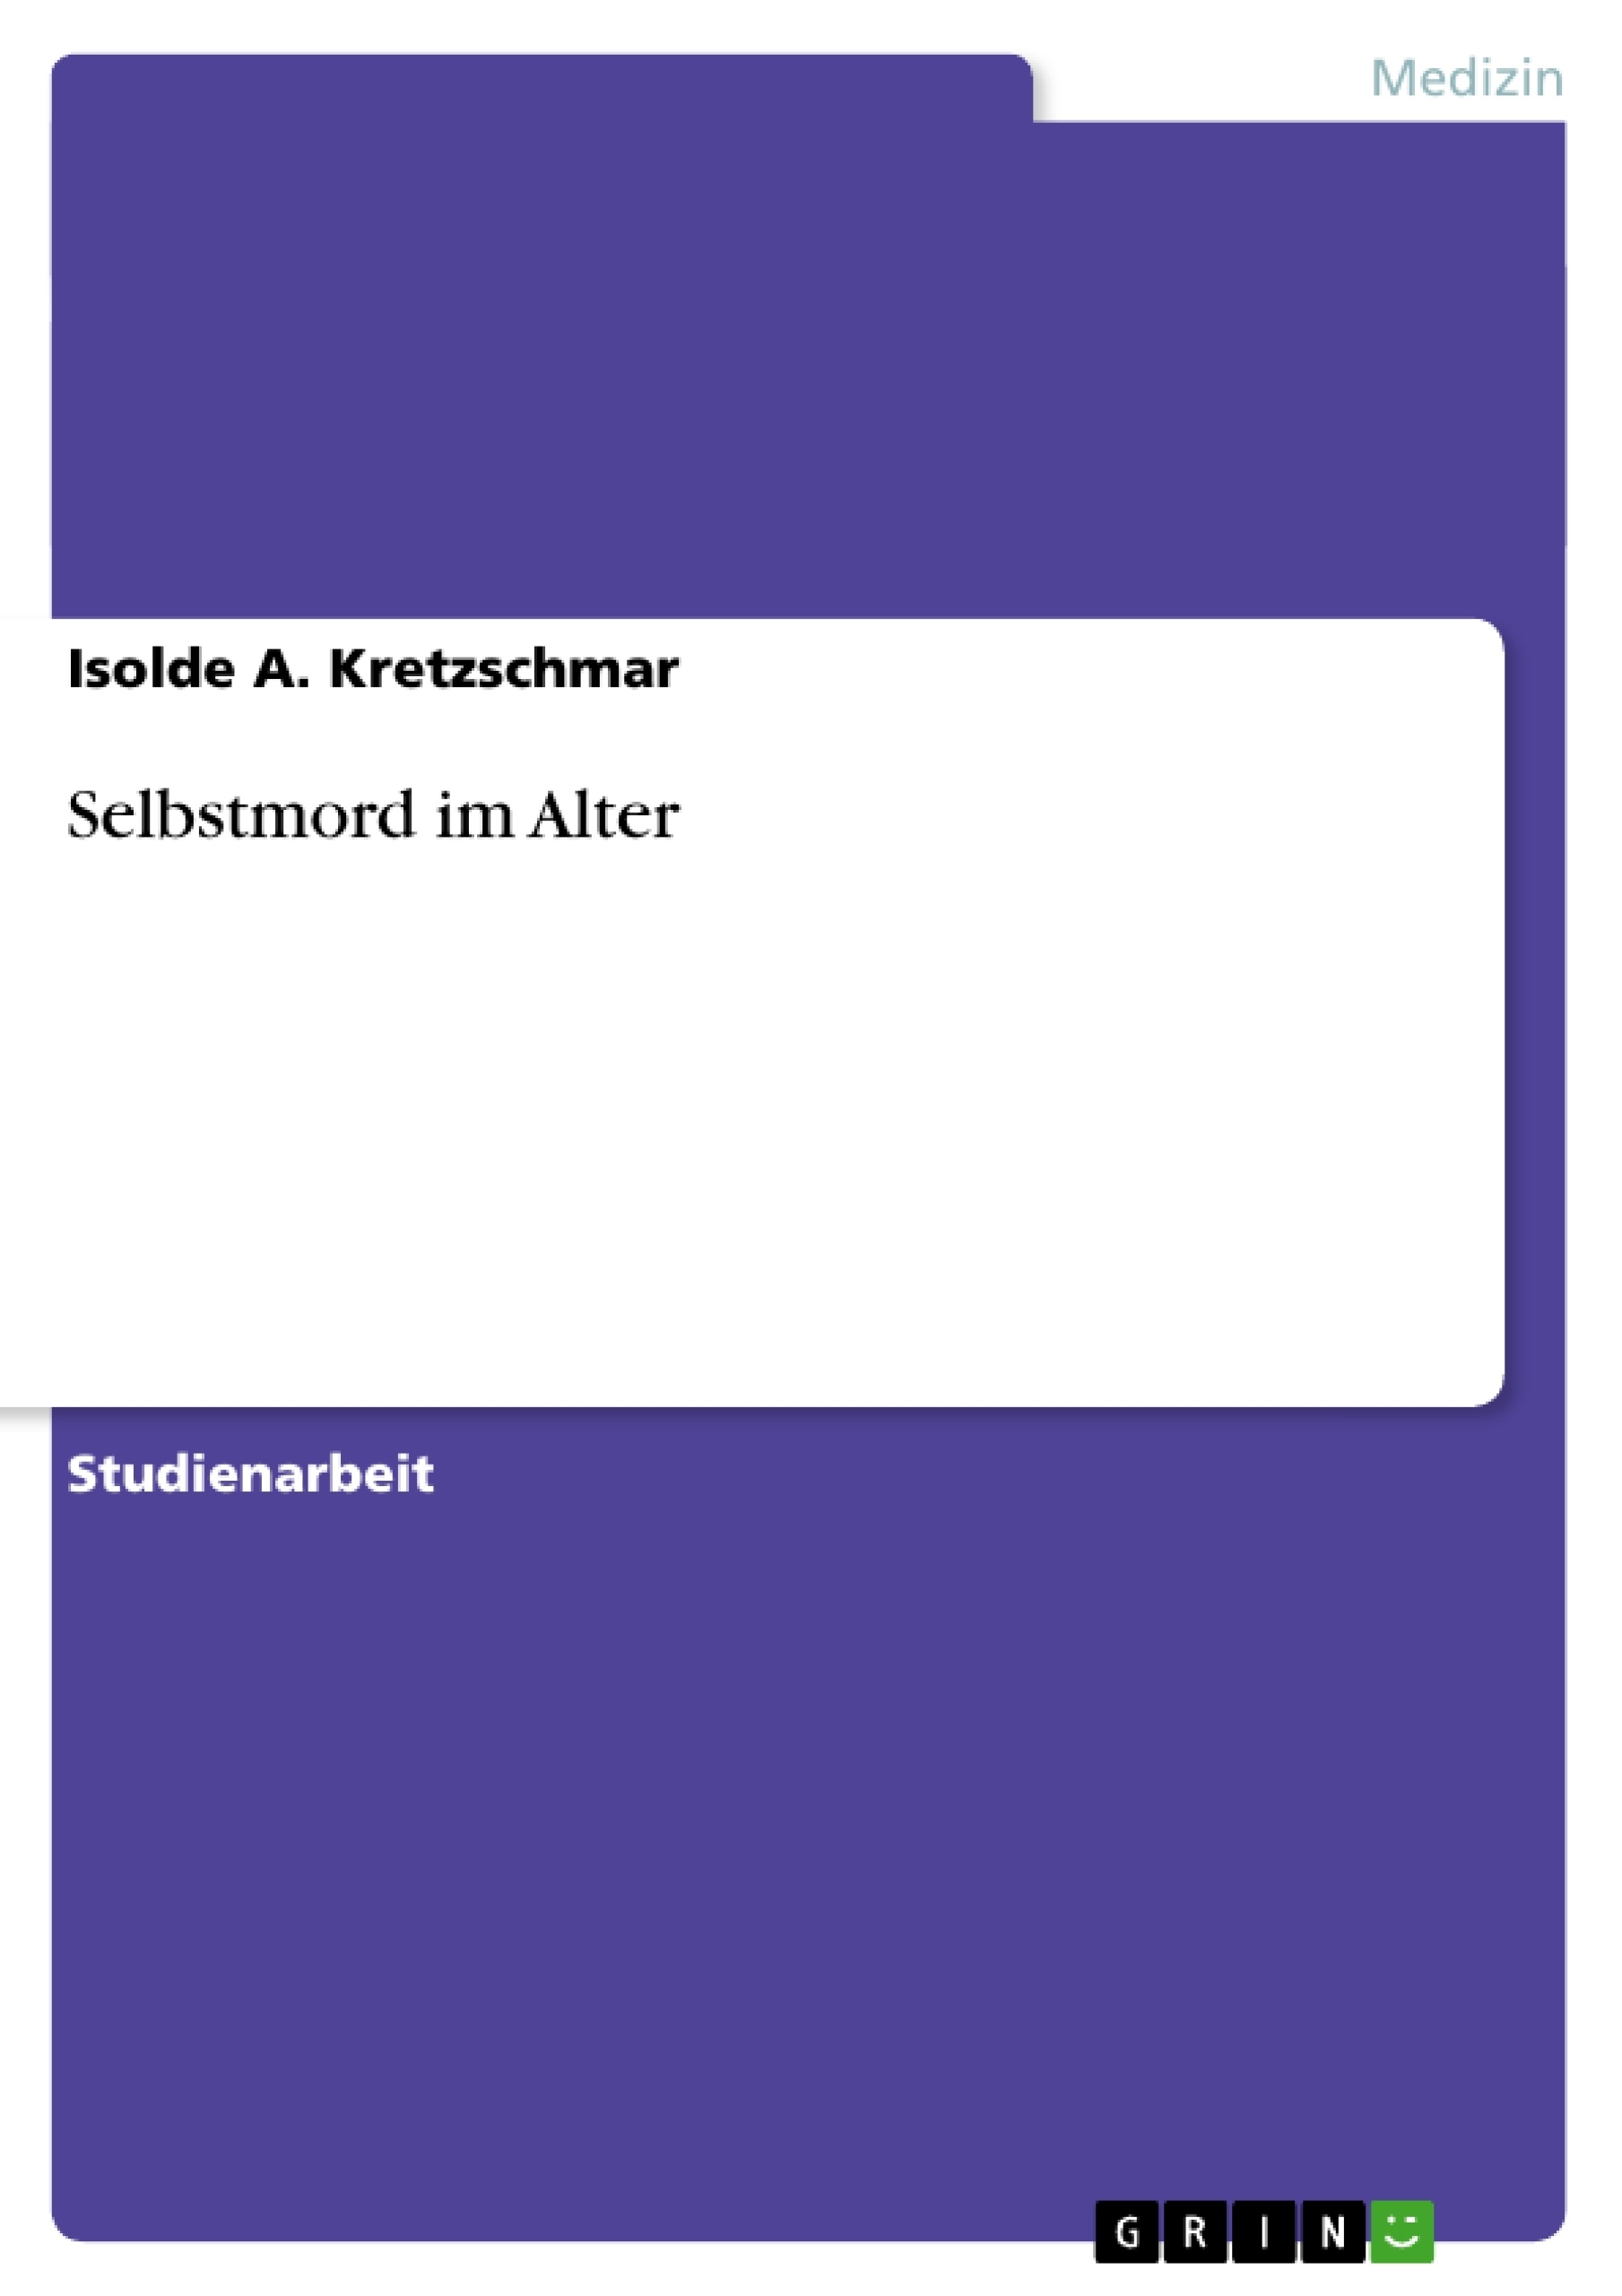 Titre: Selbstmord im Alter